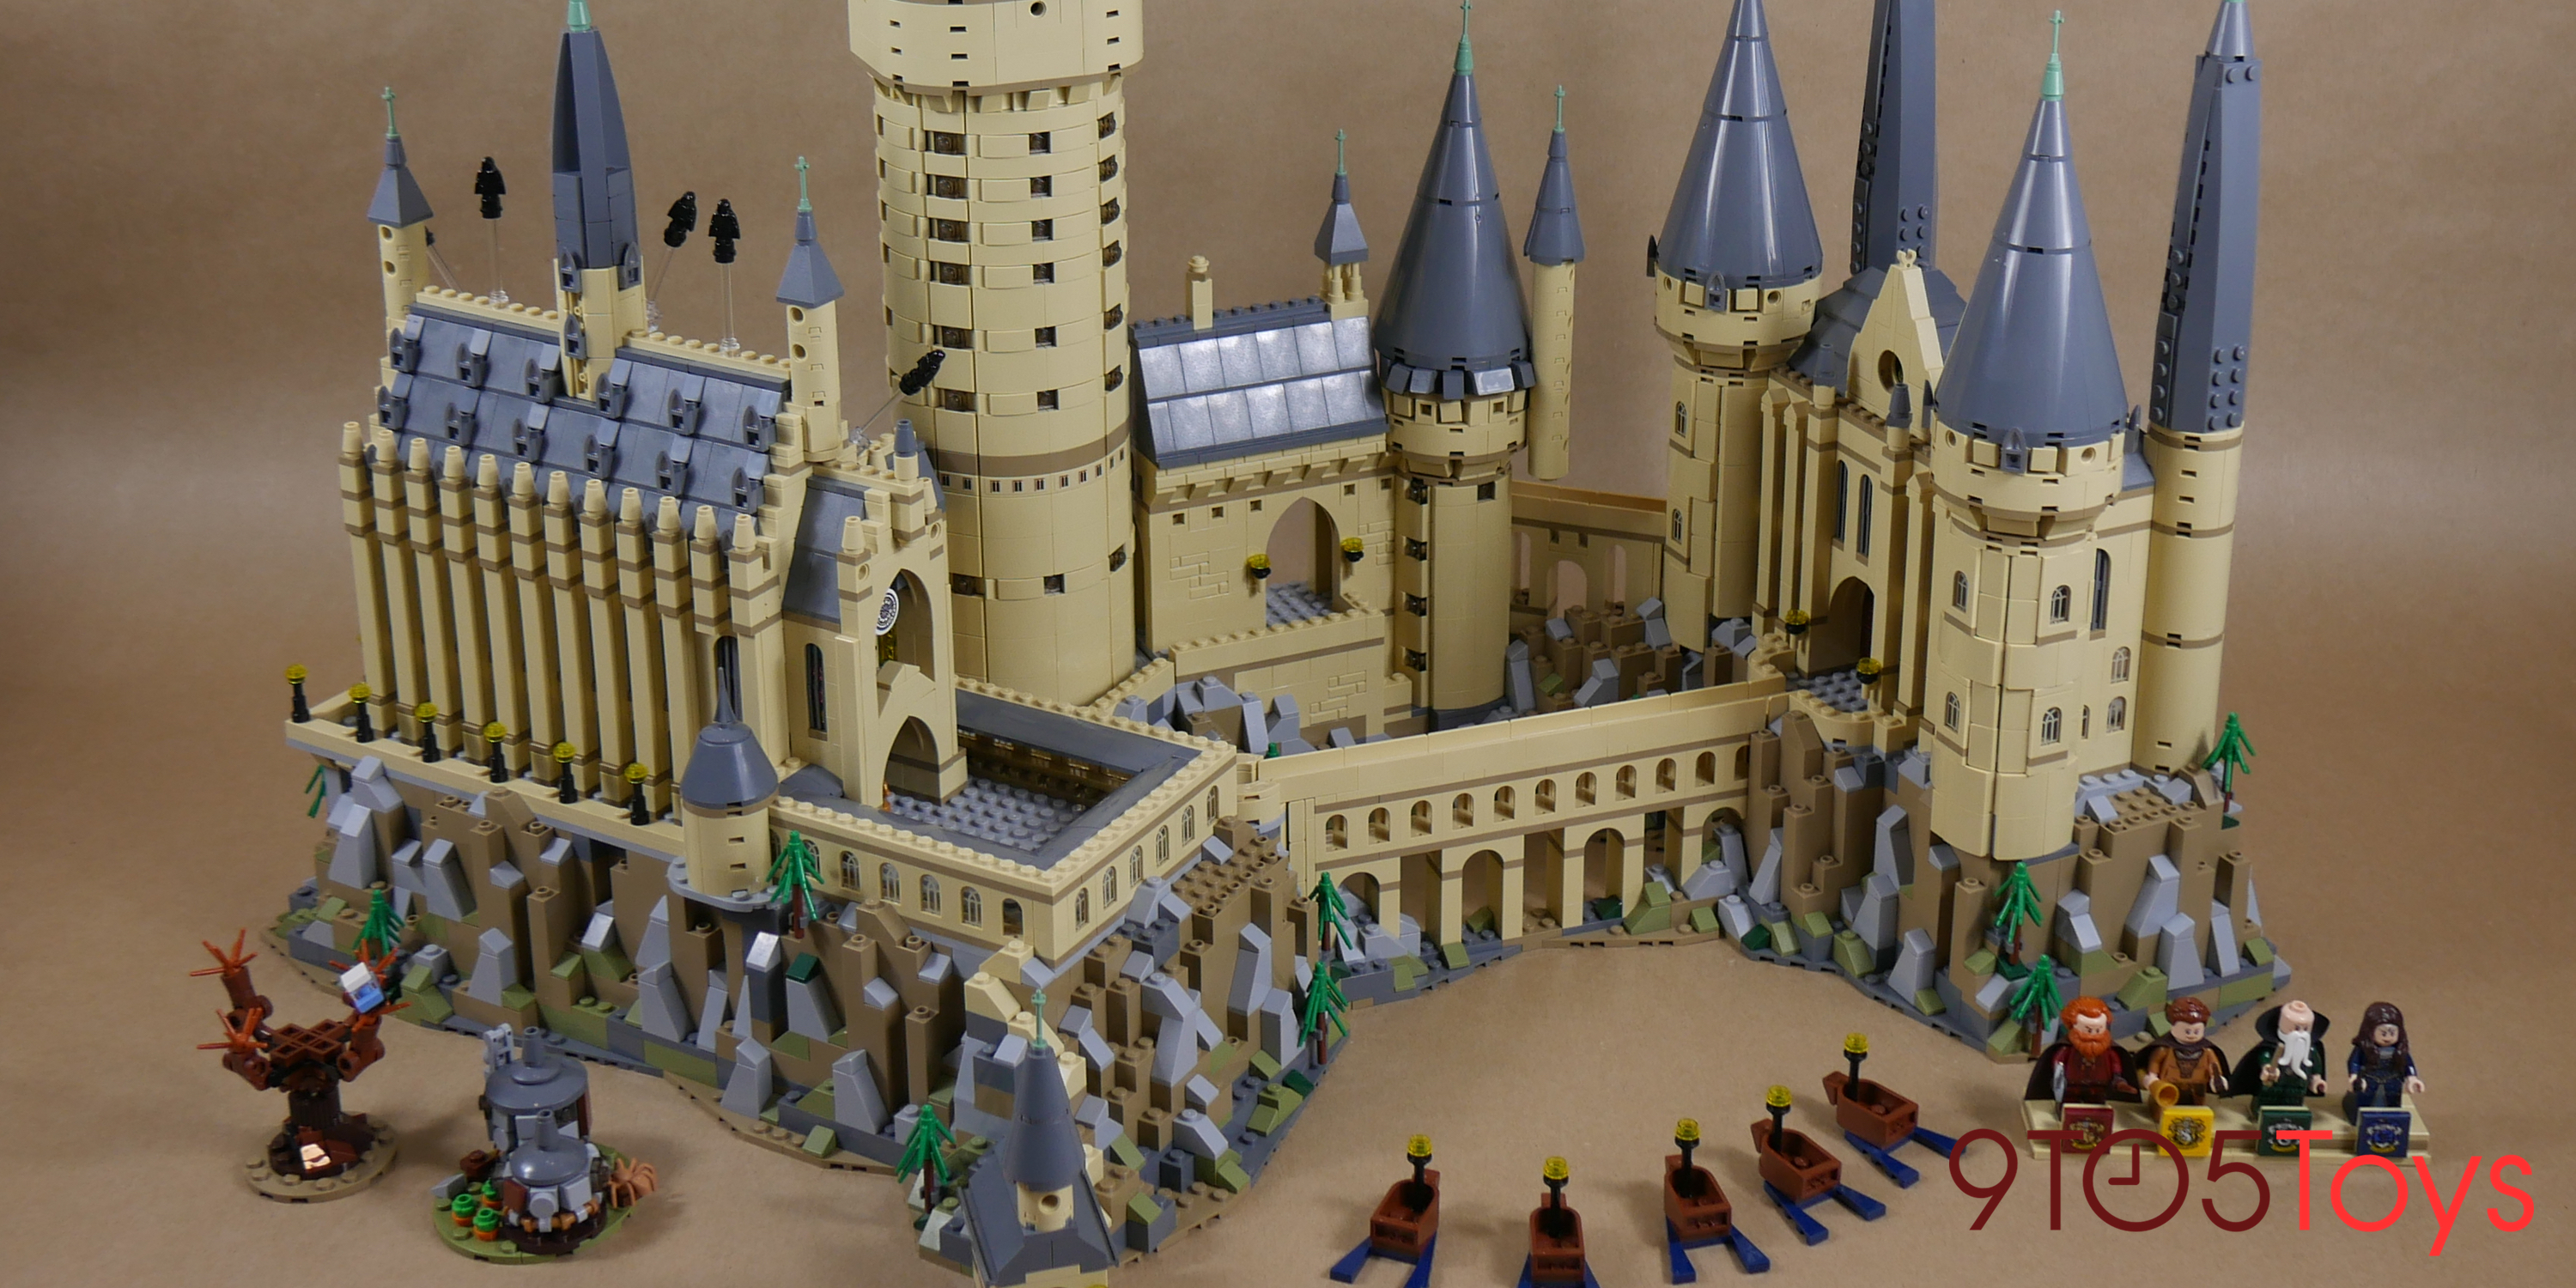 LEGO Hogwarts Castle Review The 2nd largest kit in history reigns